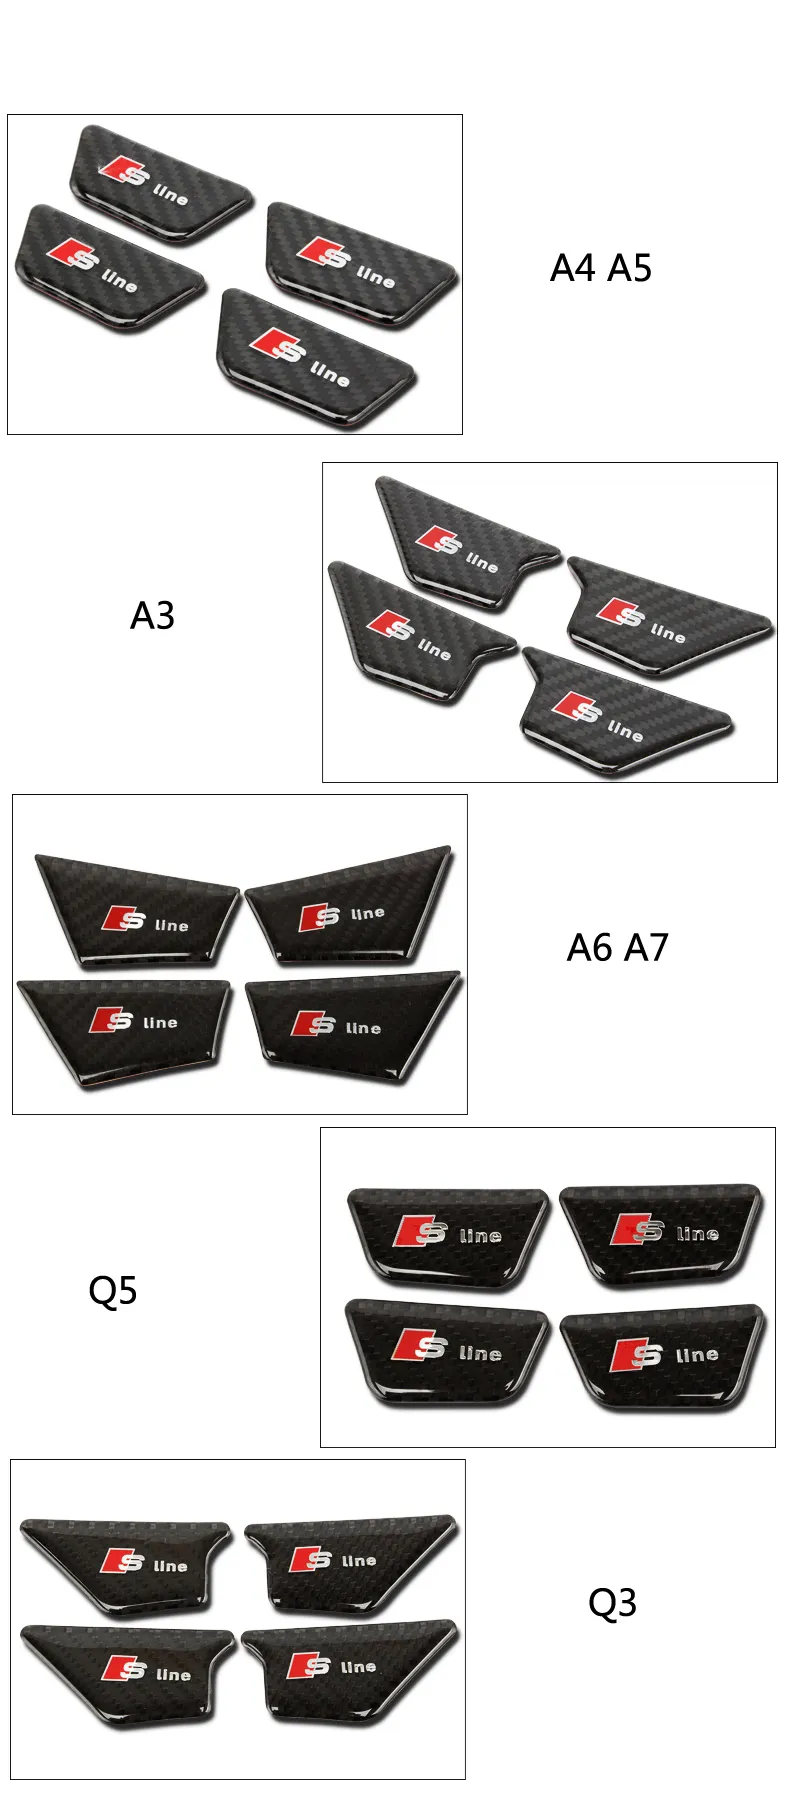 Car Styling Stickers Carbon Fiber Interior Door Inside Door Bowl Panel  Wrist Cover Trim For Audi A3 A4 A5 A6 A7 Q3 Q5 Q7 B6 Accessories From 8 €